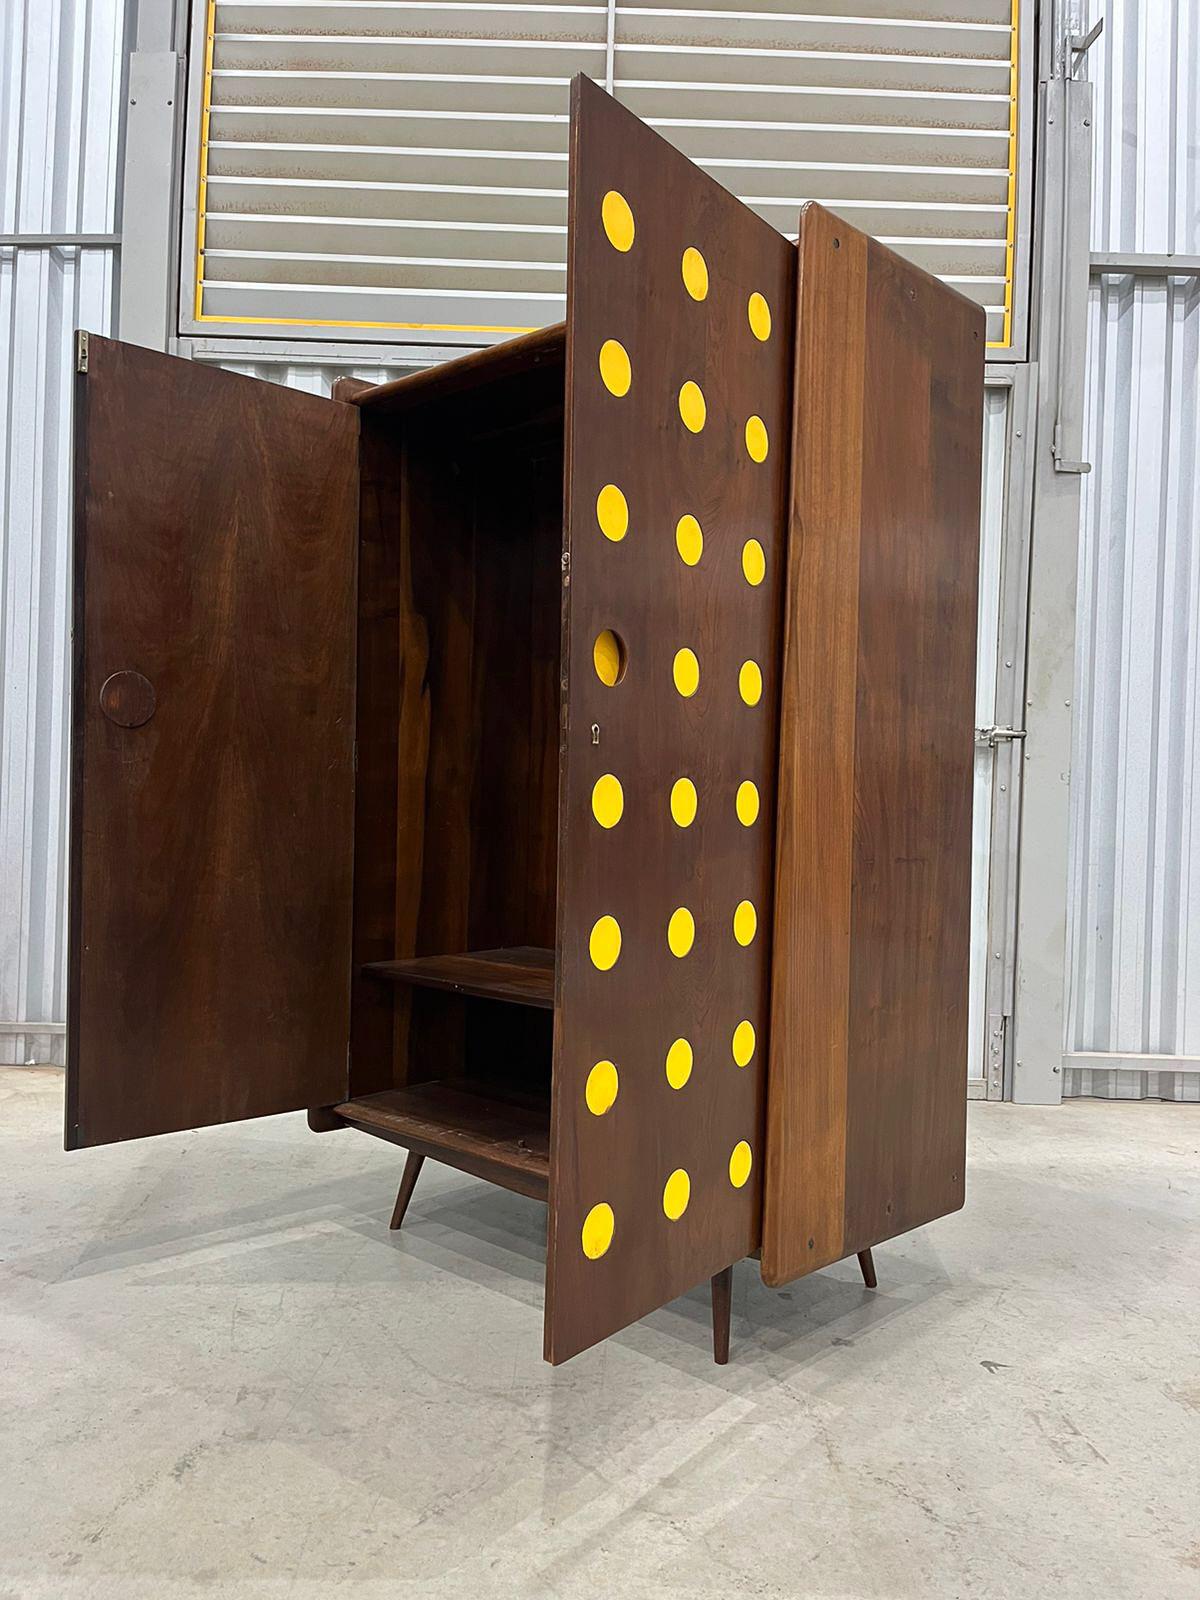 Available today, this one-of-a-kind Brazilian Modern Armoire in Hardwood by  Moveis Cimo in the fifties is a very rare FIND and is gorgeous!

The armoire is entirely made in Imbuia hardwood and features a rectangular structure with curved ends, two